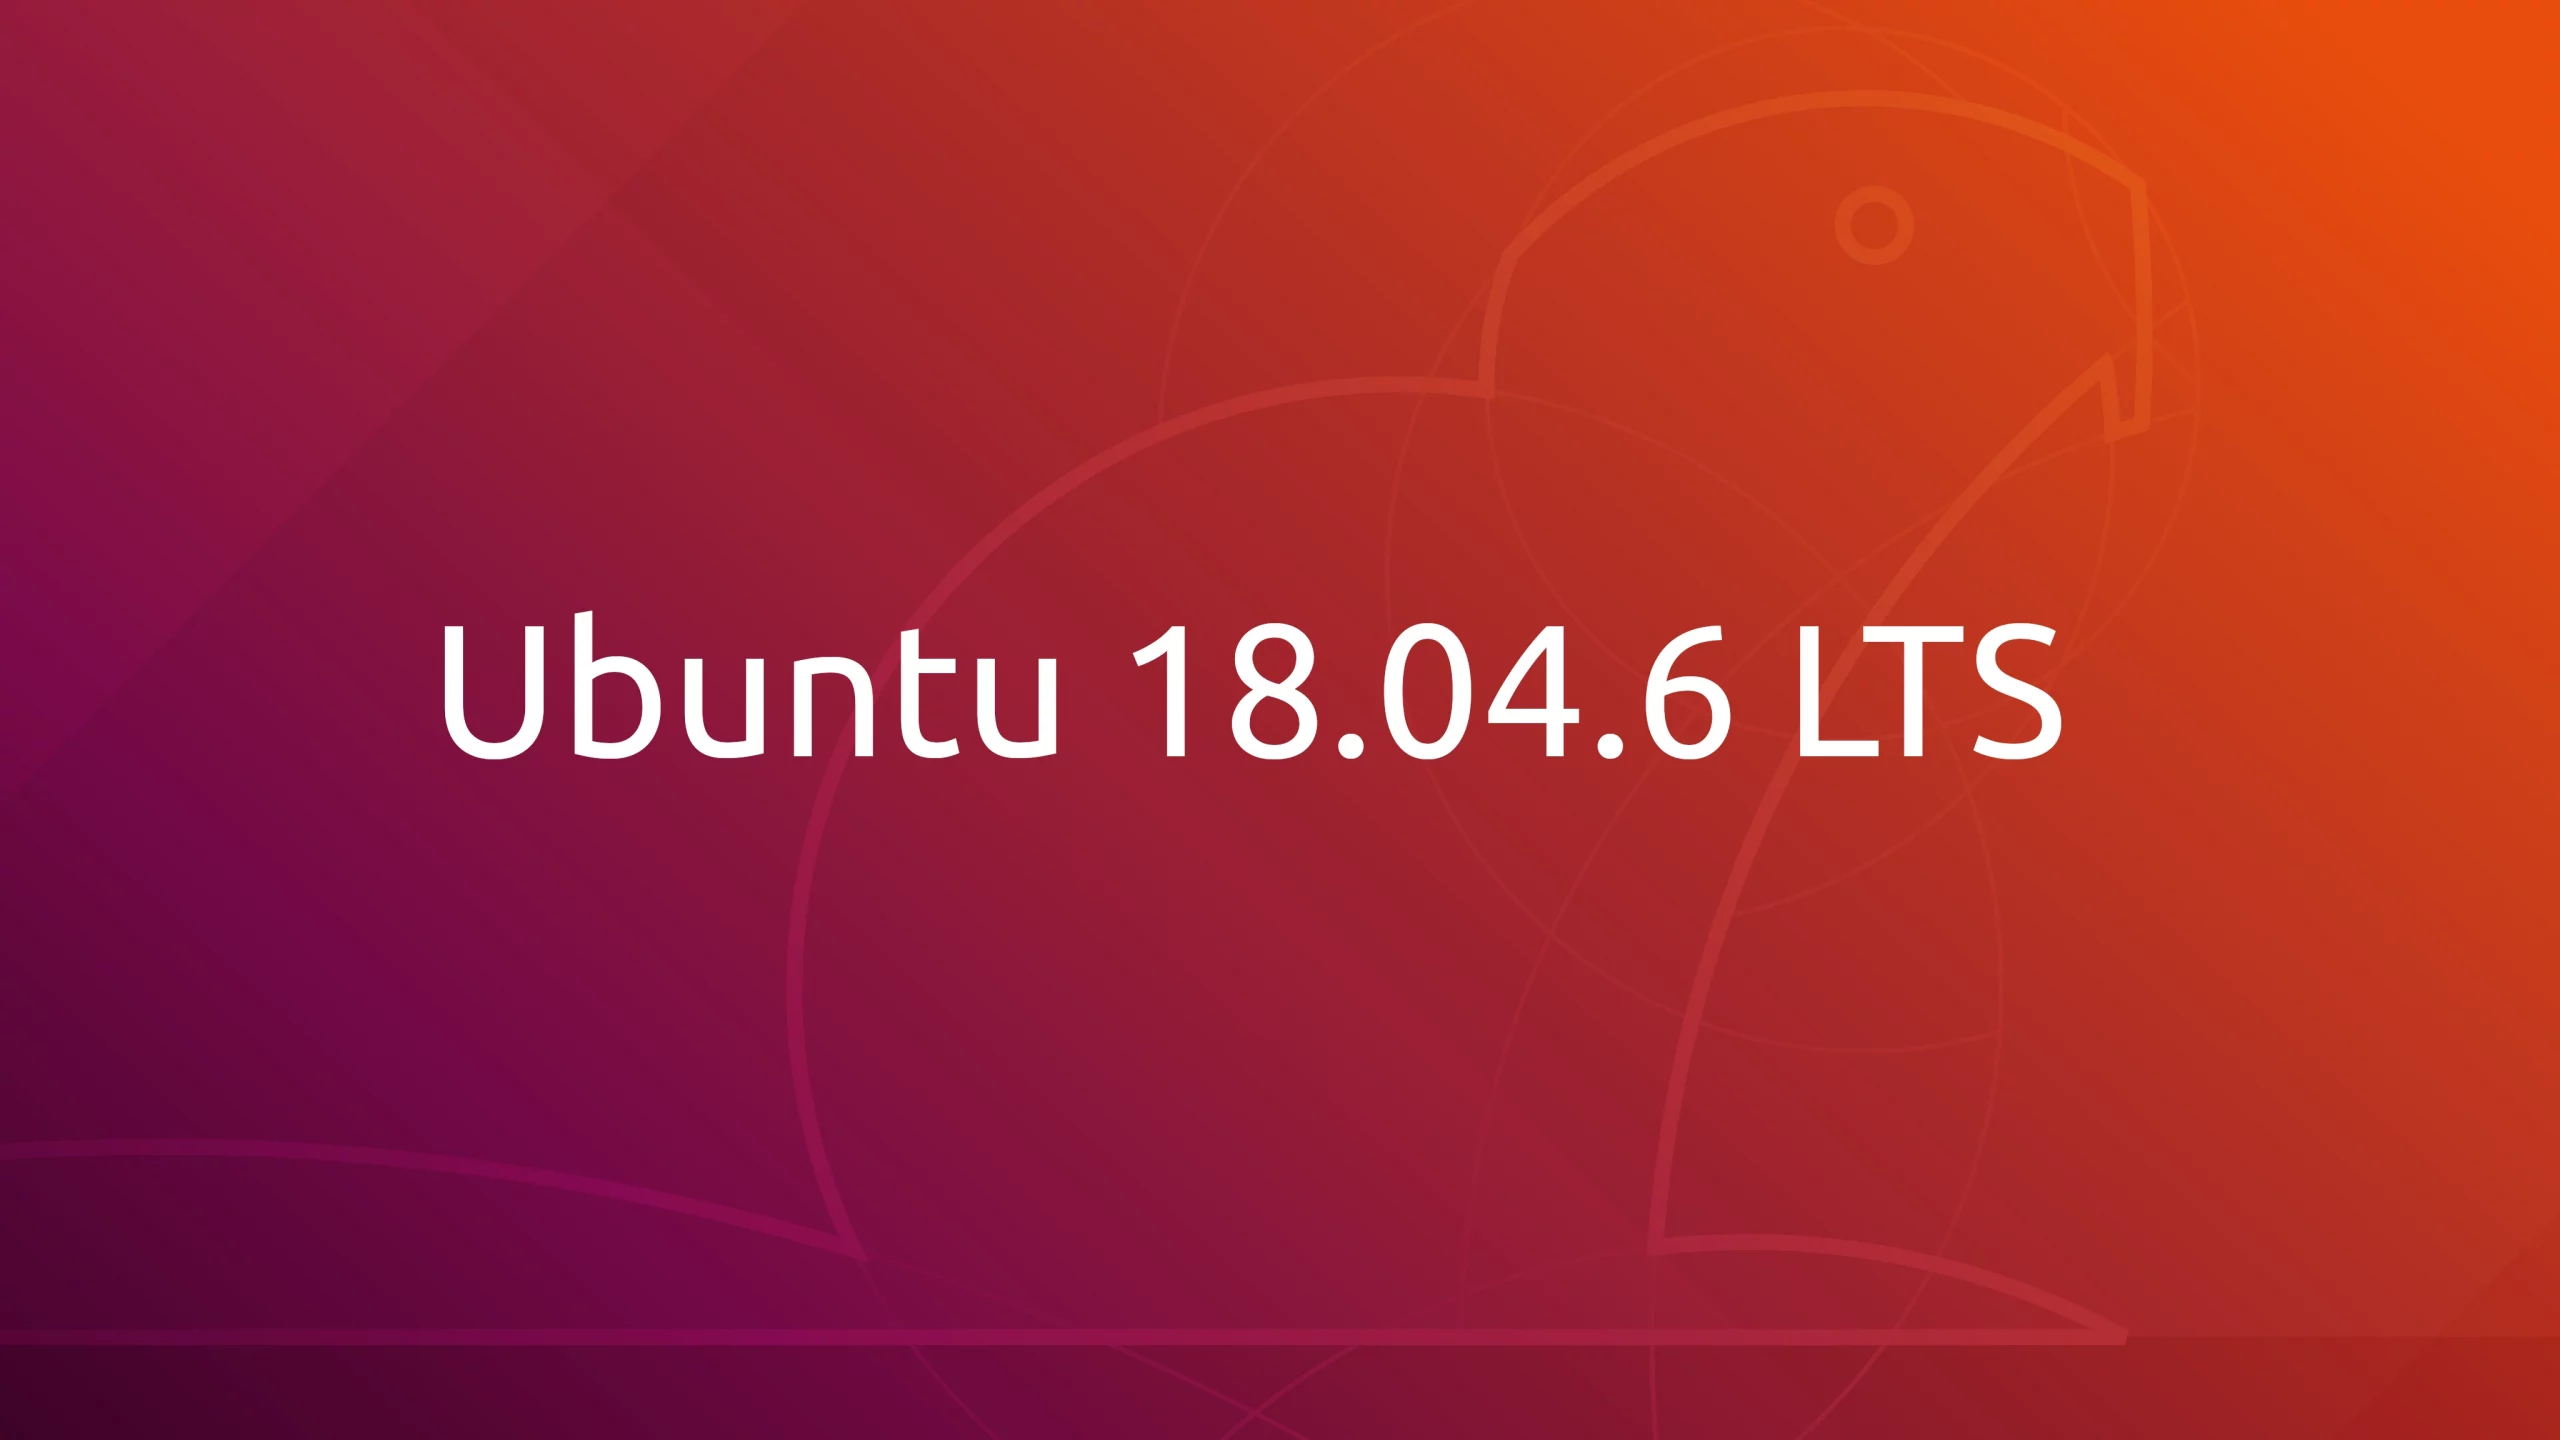 Ubuntu 18.04.6 LTS Released with BootHole Patches, Latest Security Updates